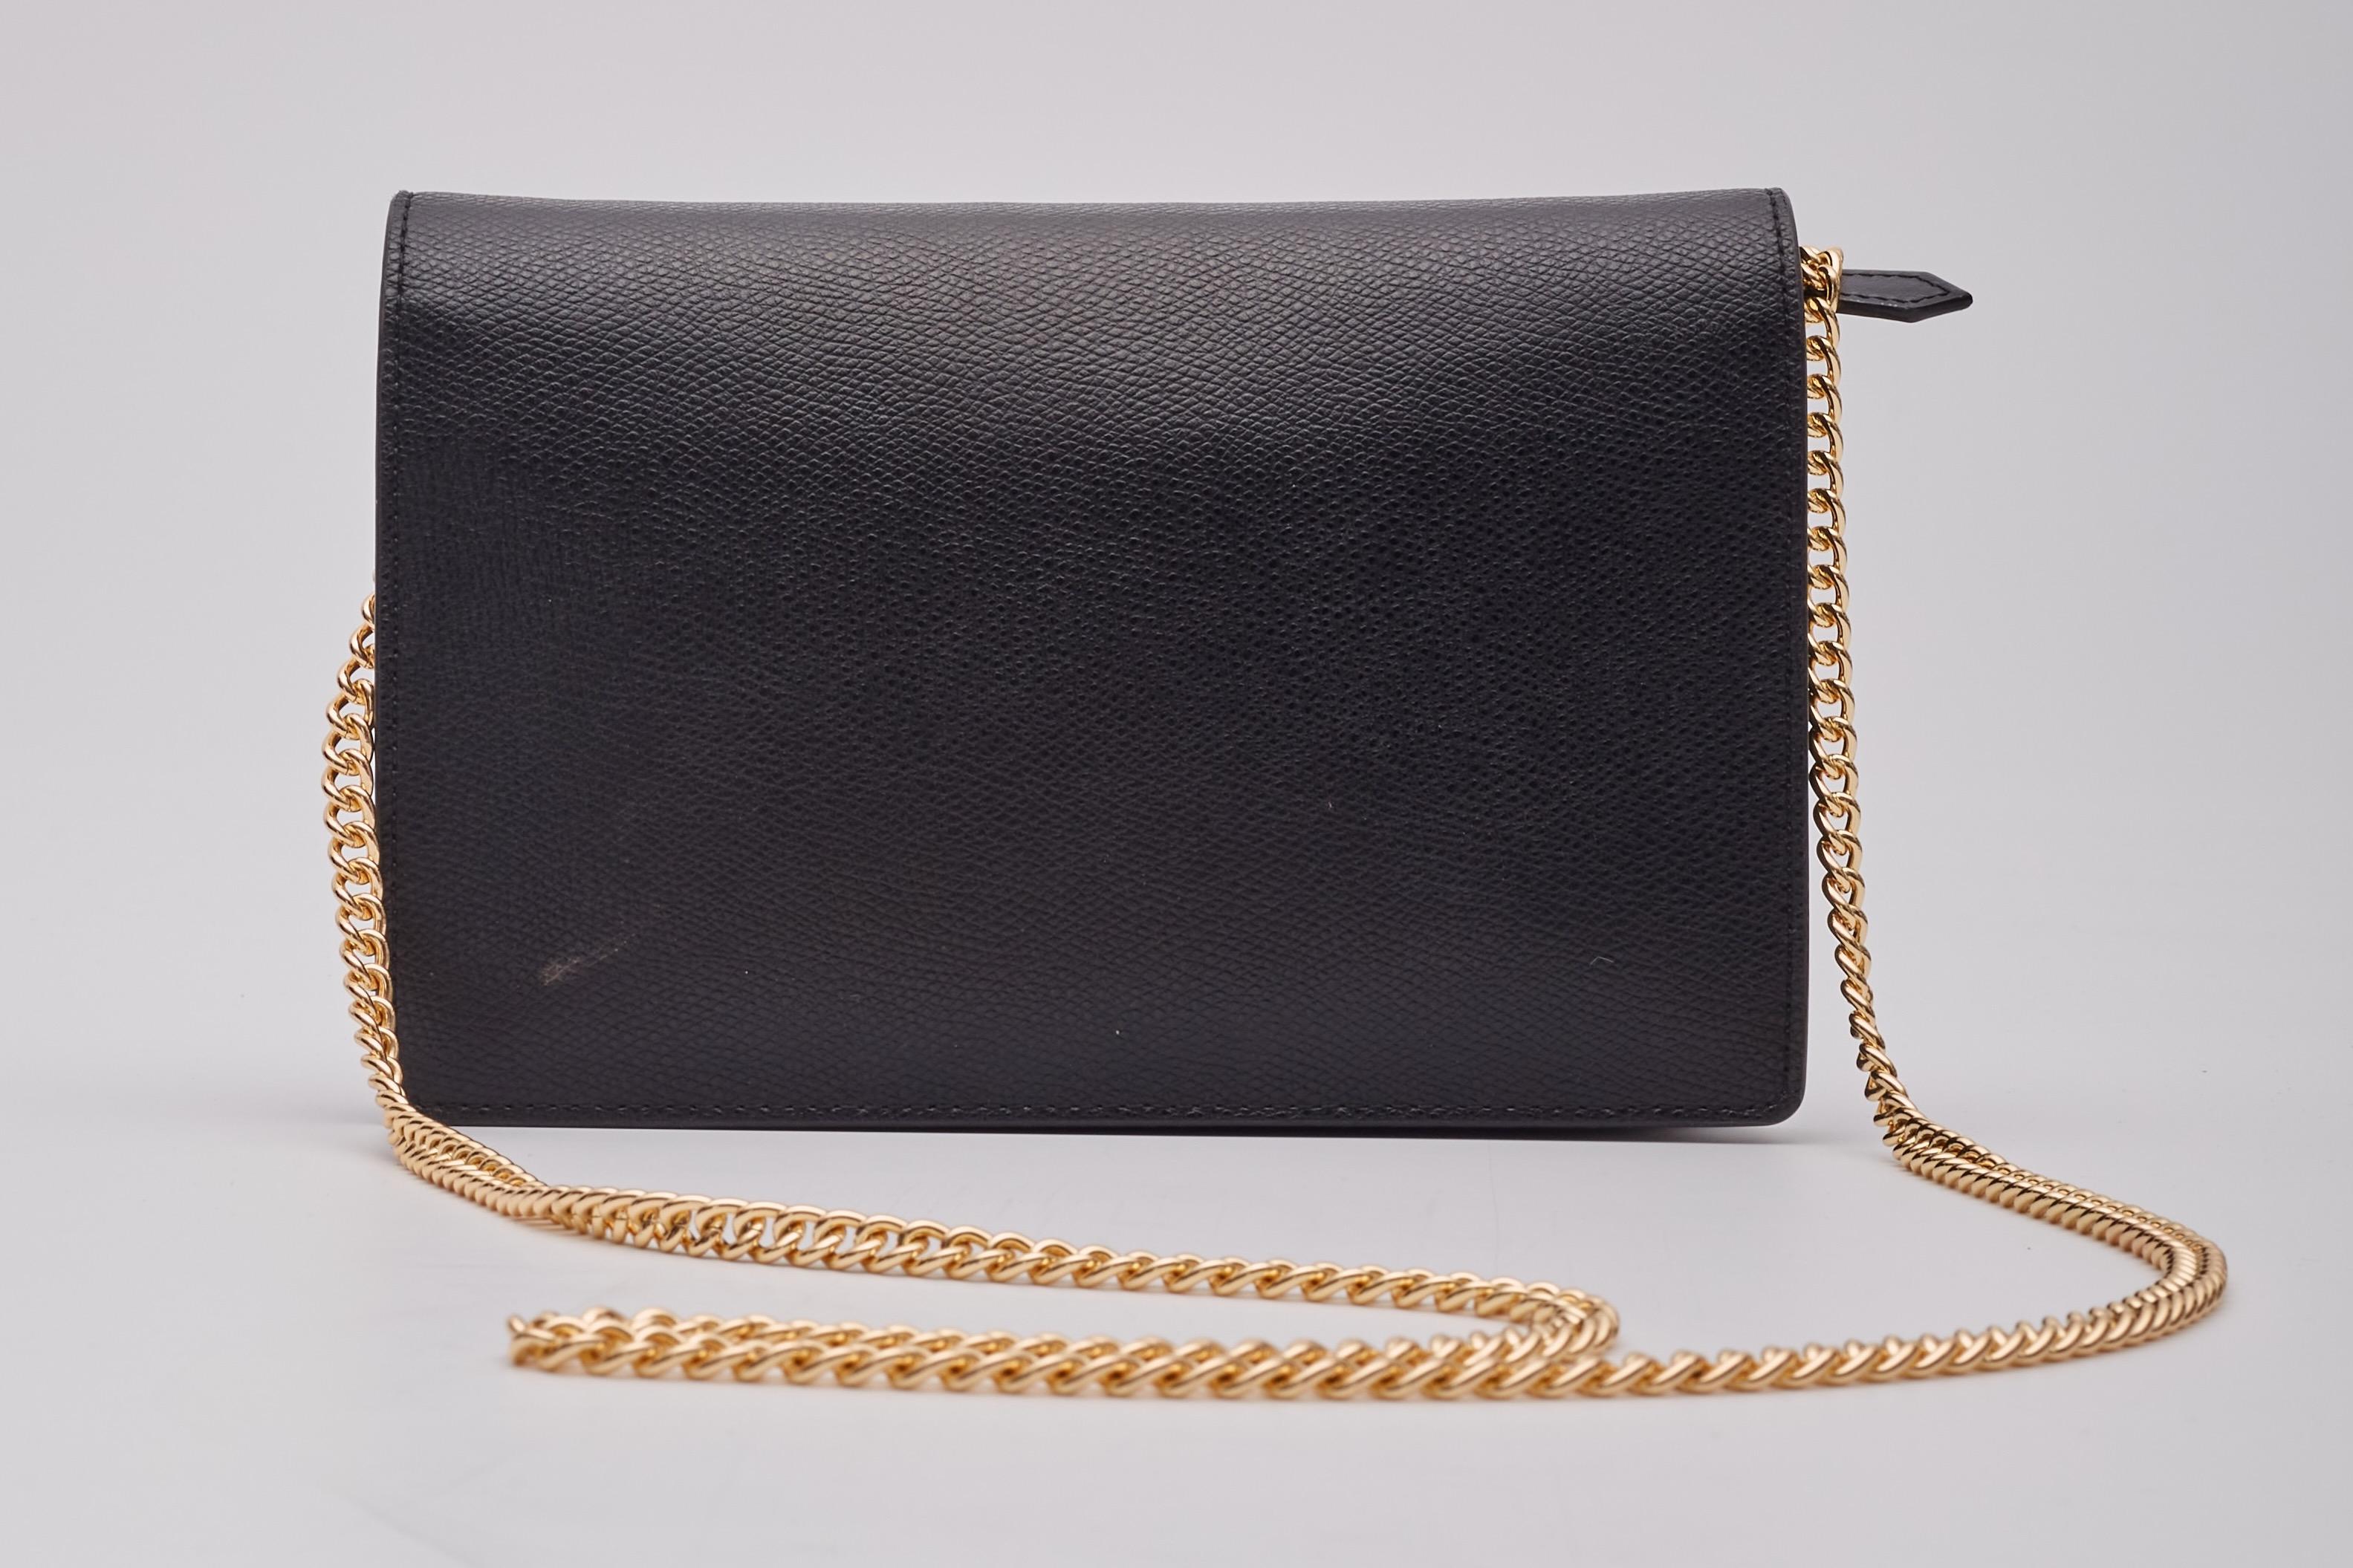 Fendi Black Leather F Logo Wallet On Chain Bag In Good Condition For Sale In Montreal, Quebec